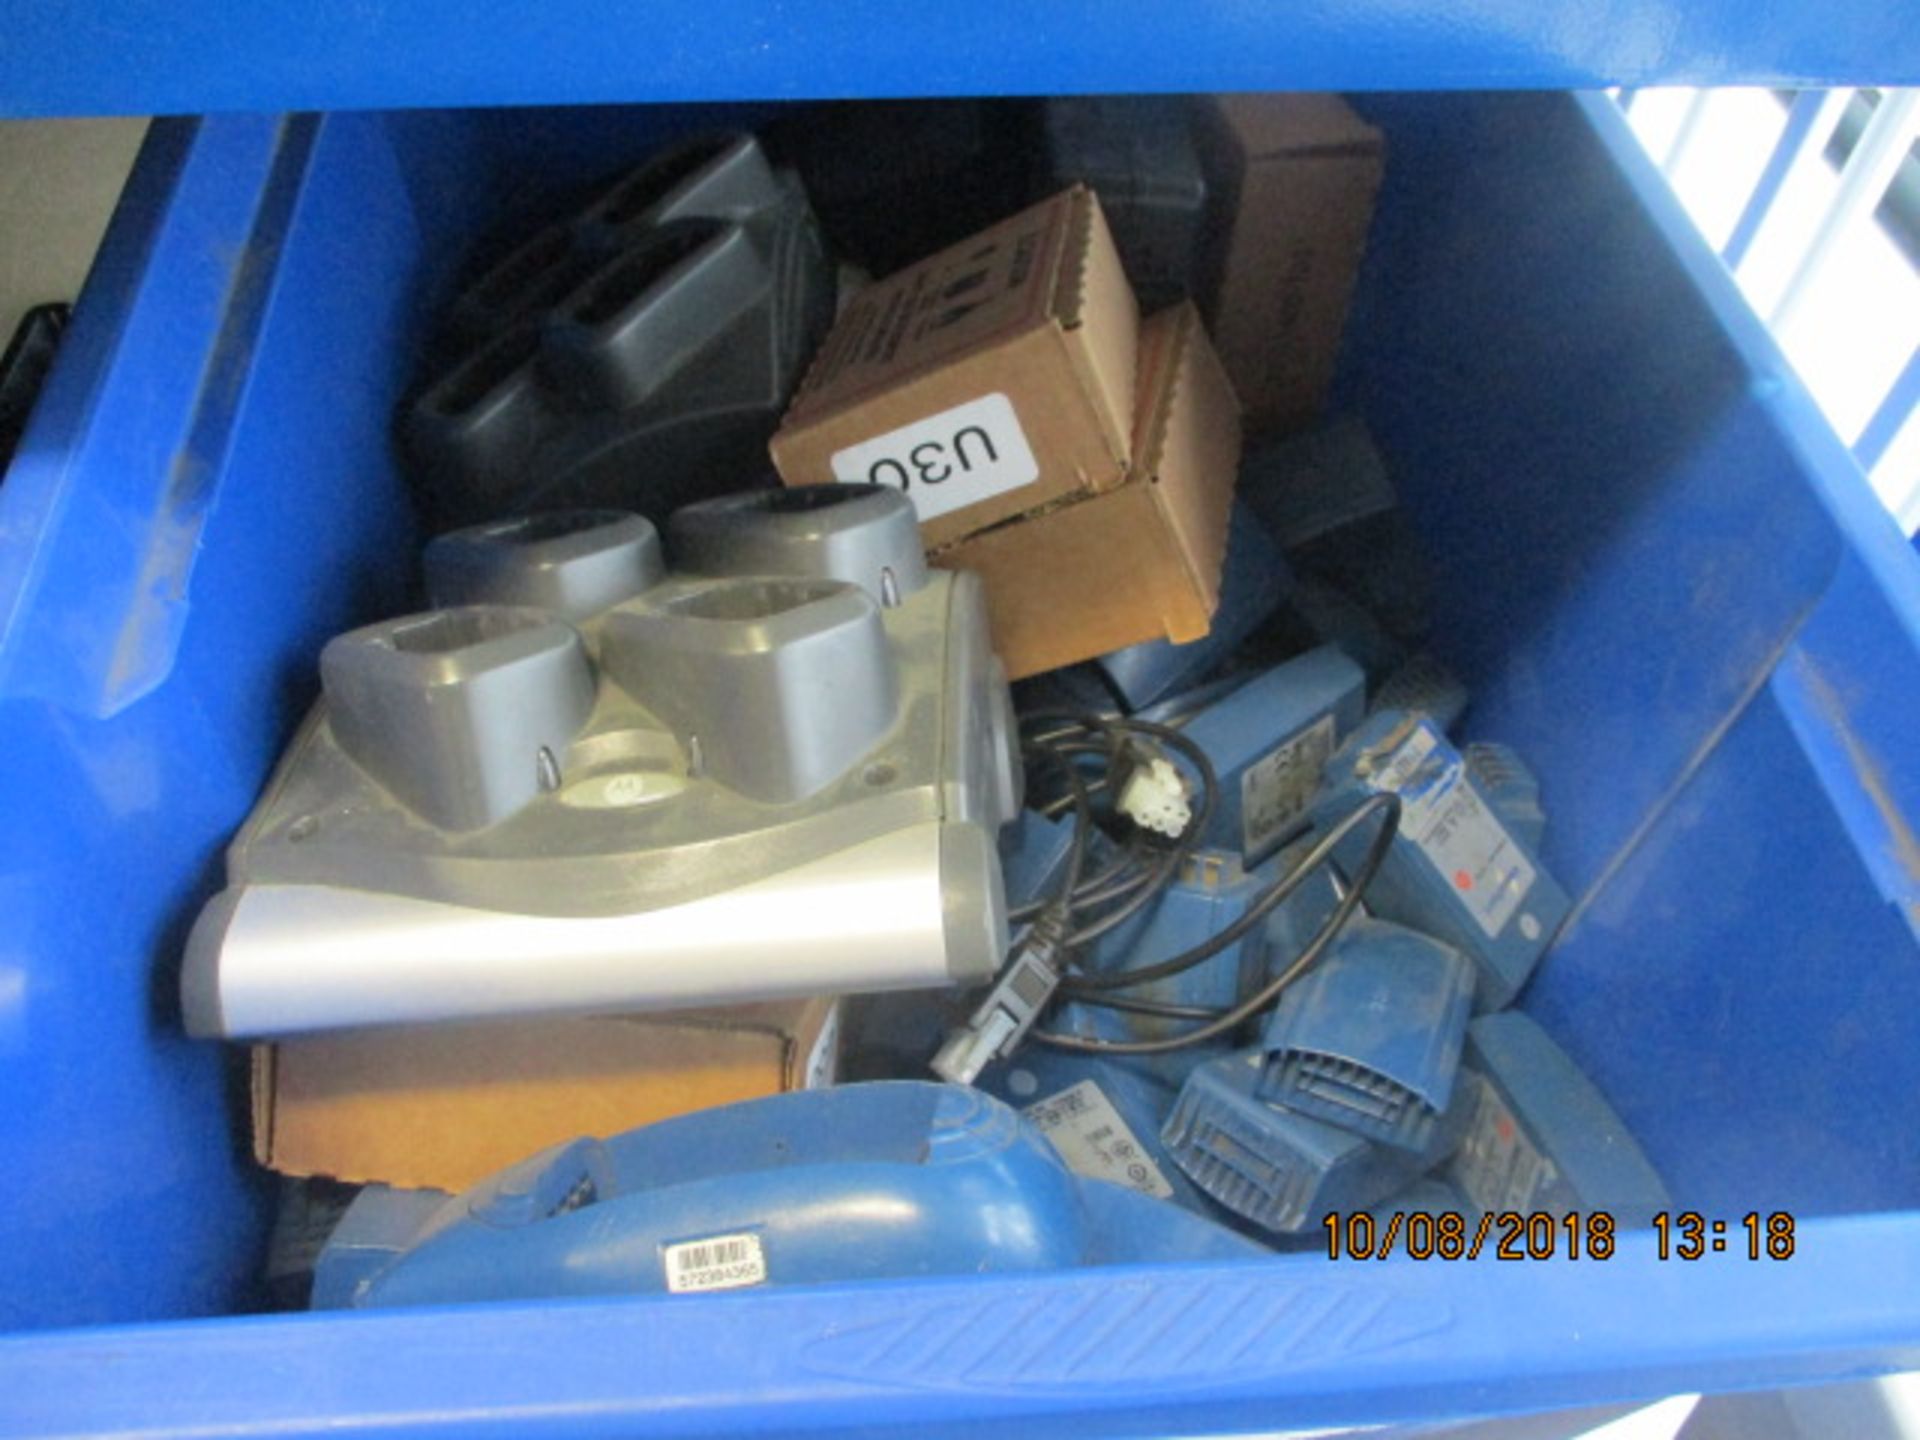 Assorted Scanner Components, as set out in box - Image 2 of 2